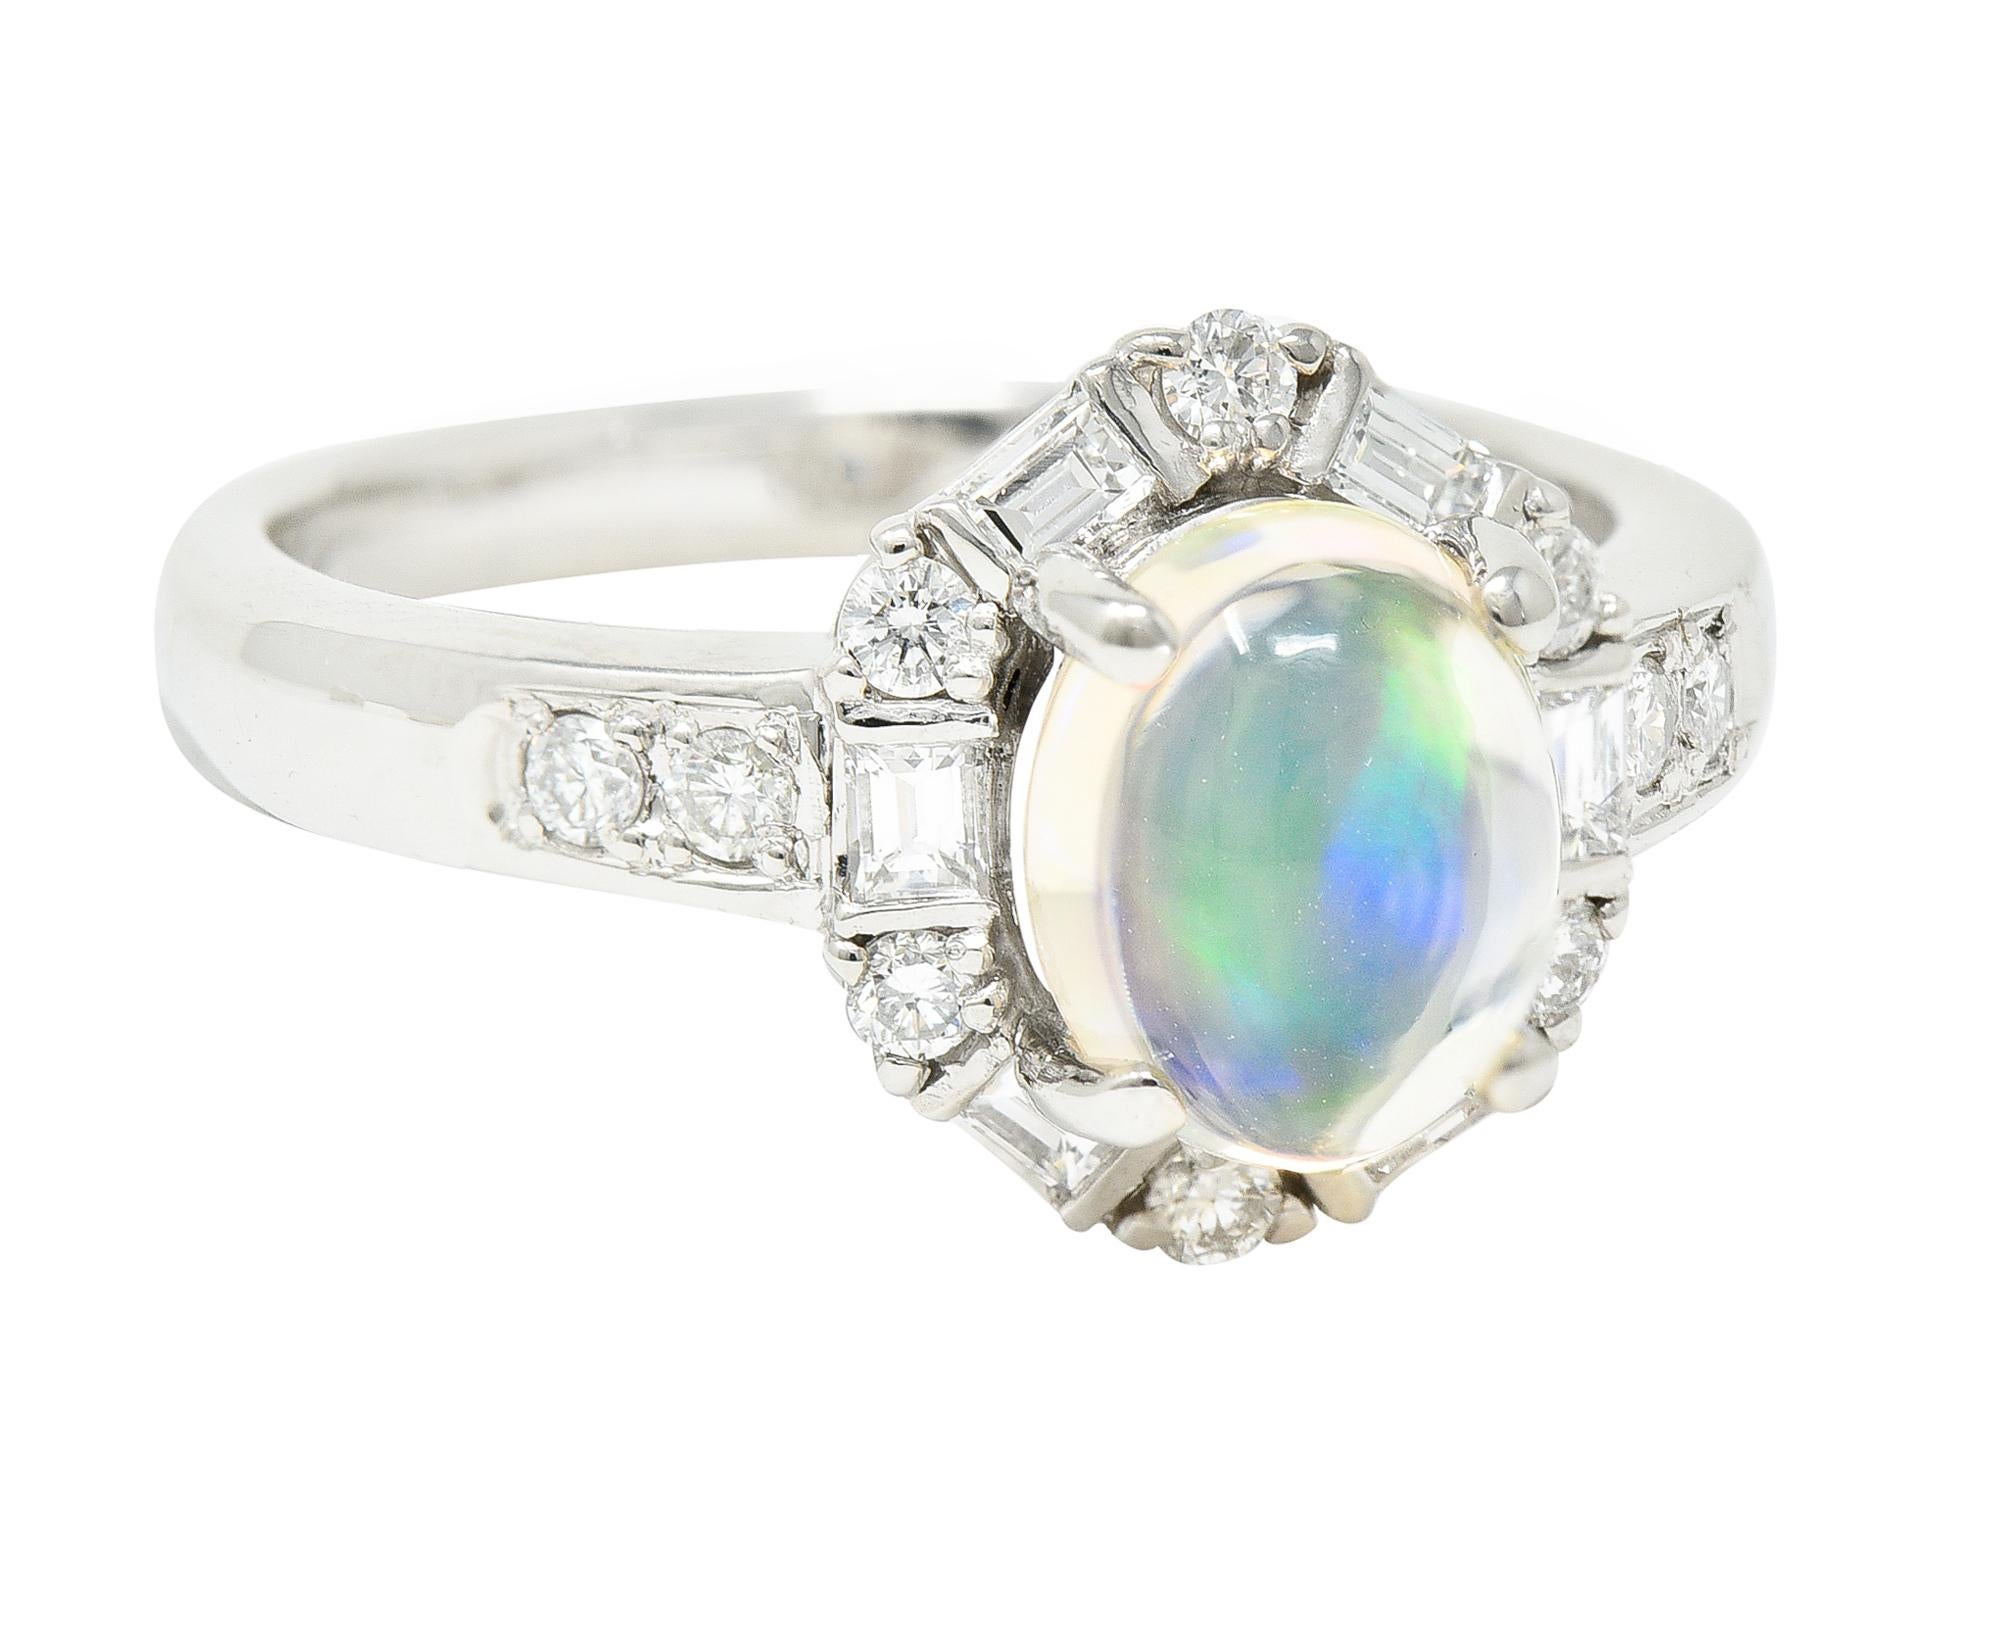 Centering an oval jelly opal cabochon measuring 6.6 x 8.0 mm. Colorless body with spectral play-of-color; prong set. Featuring a halo surround of baguette and round brilliant cut diamonds. Prong set and weighing approximately 0.49 carat total. G/H